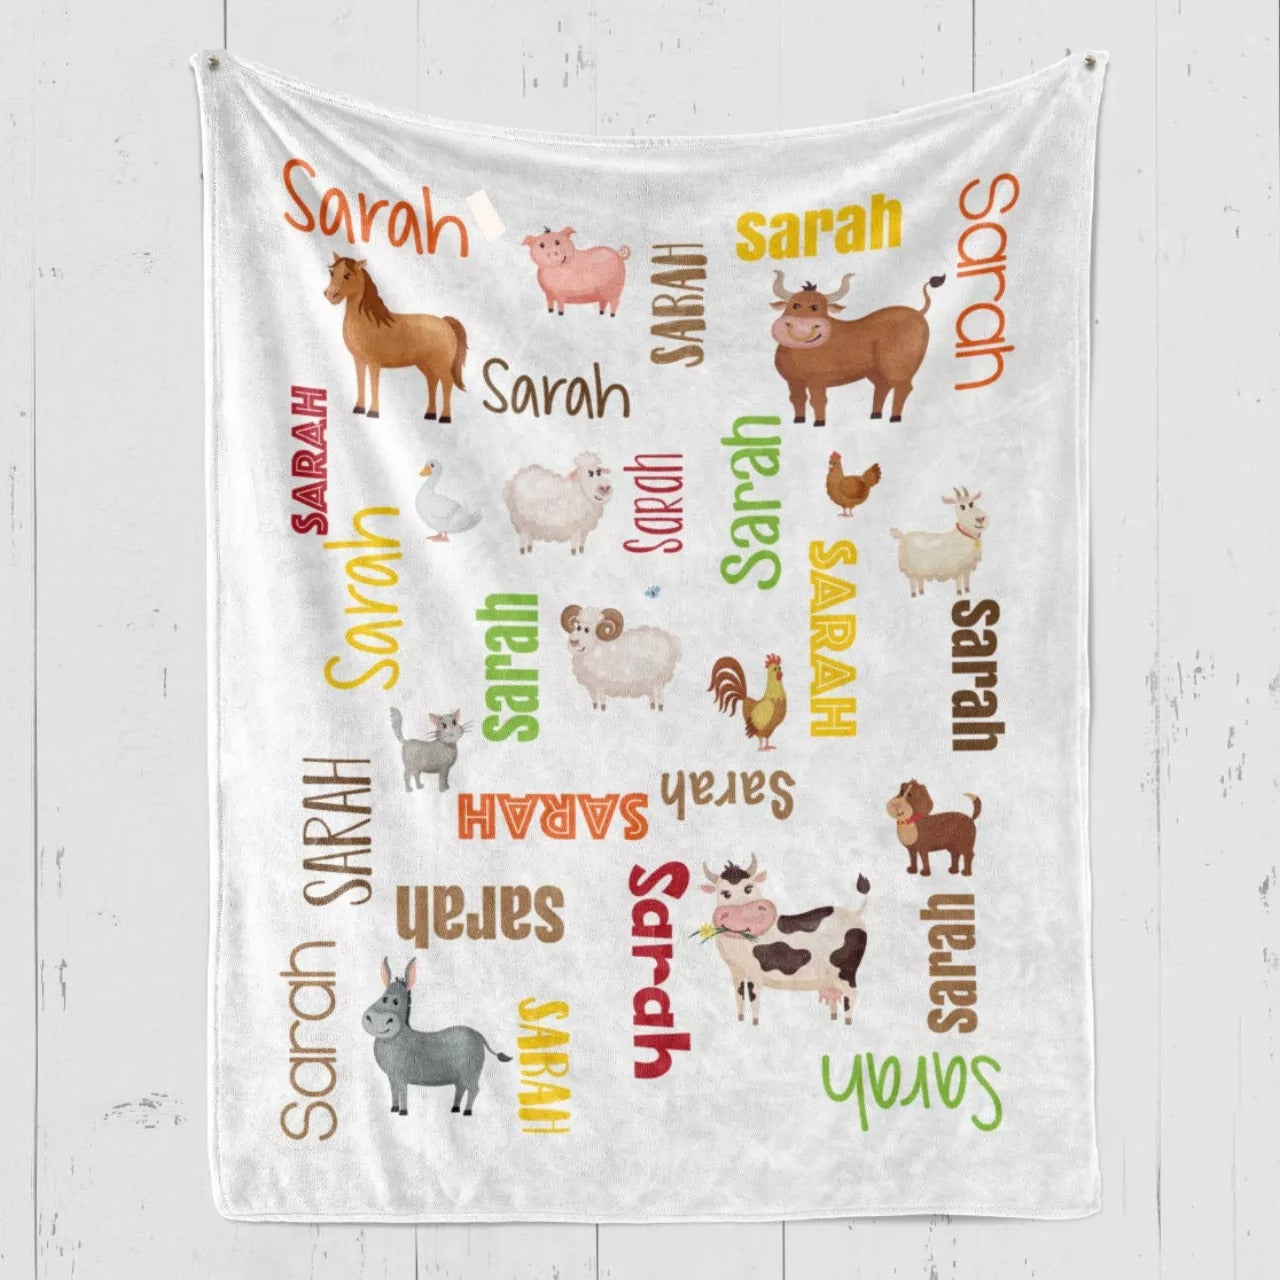 Custom With Name Animal Farm Baby Blanket/ Cute Animal Horse Sheep Rooster Small Blanket For Newborn Baby/ Kids Blanket